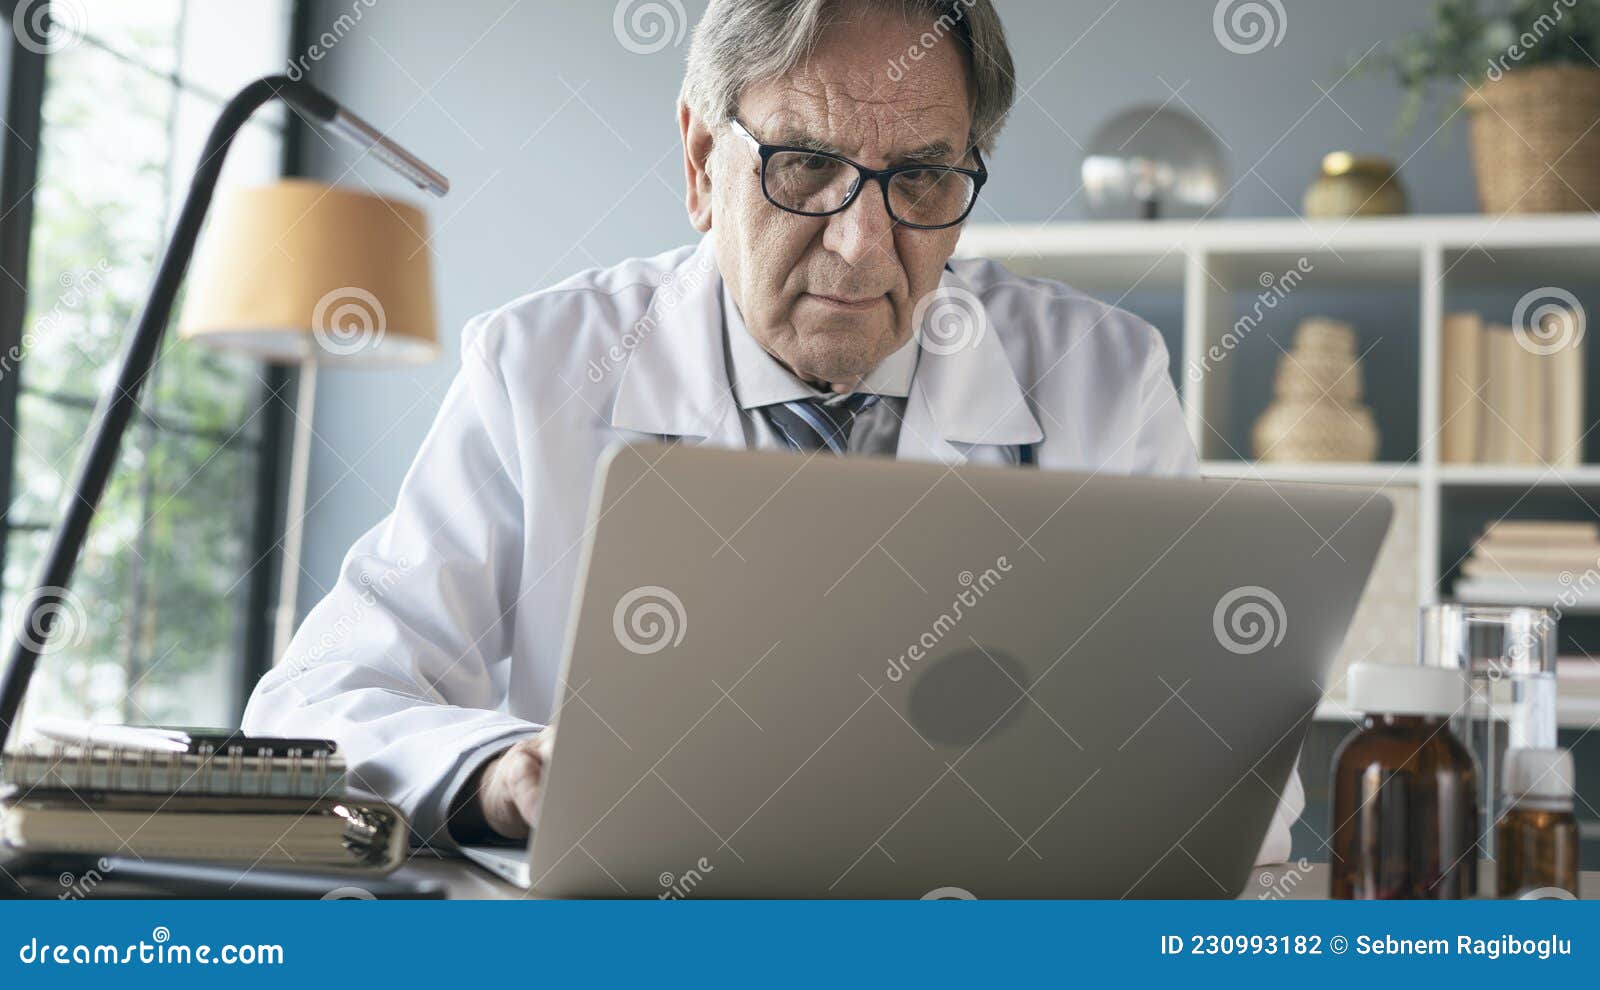 Talking by Video Call on Computer Stock Photo - Image of medical ...